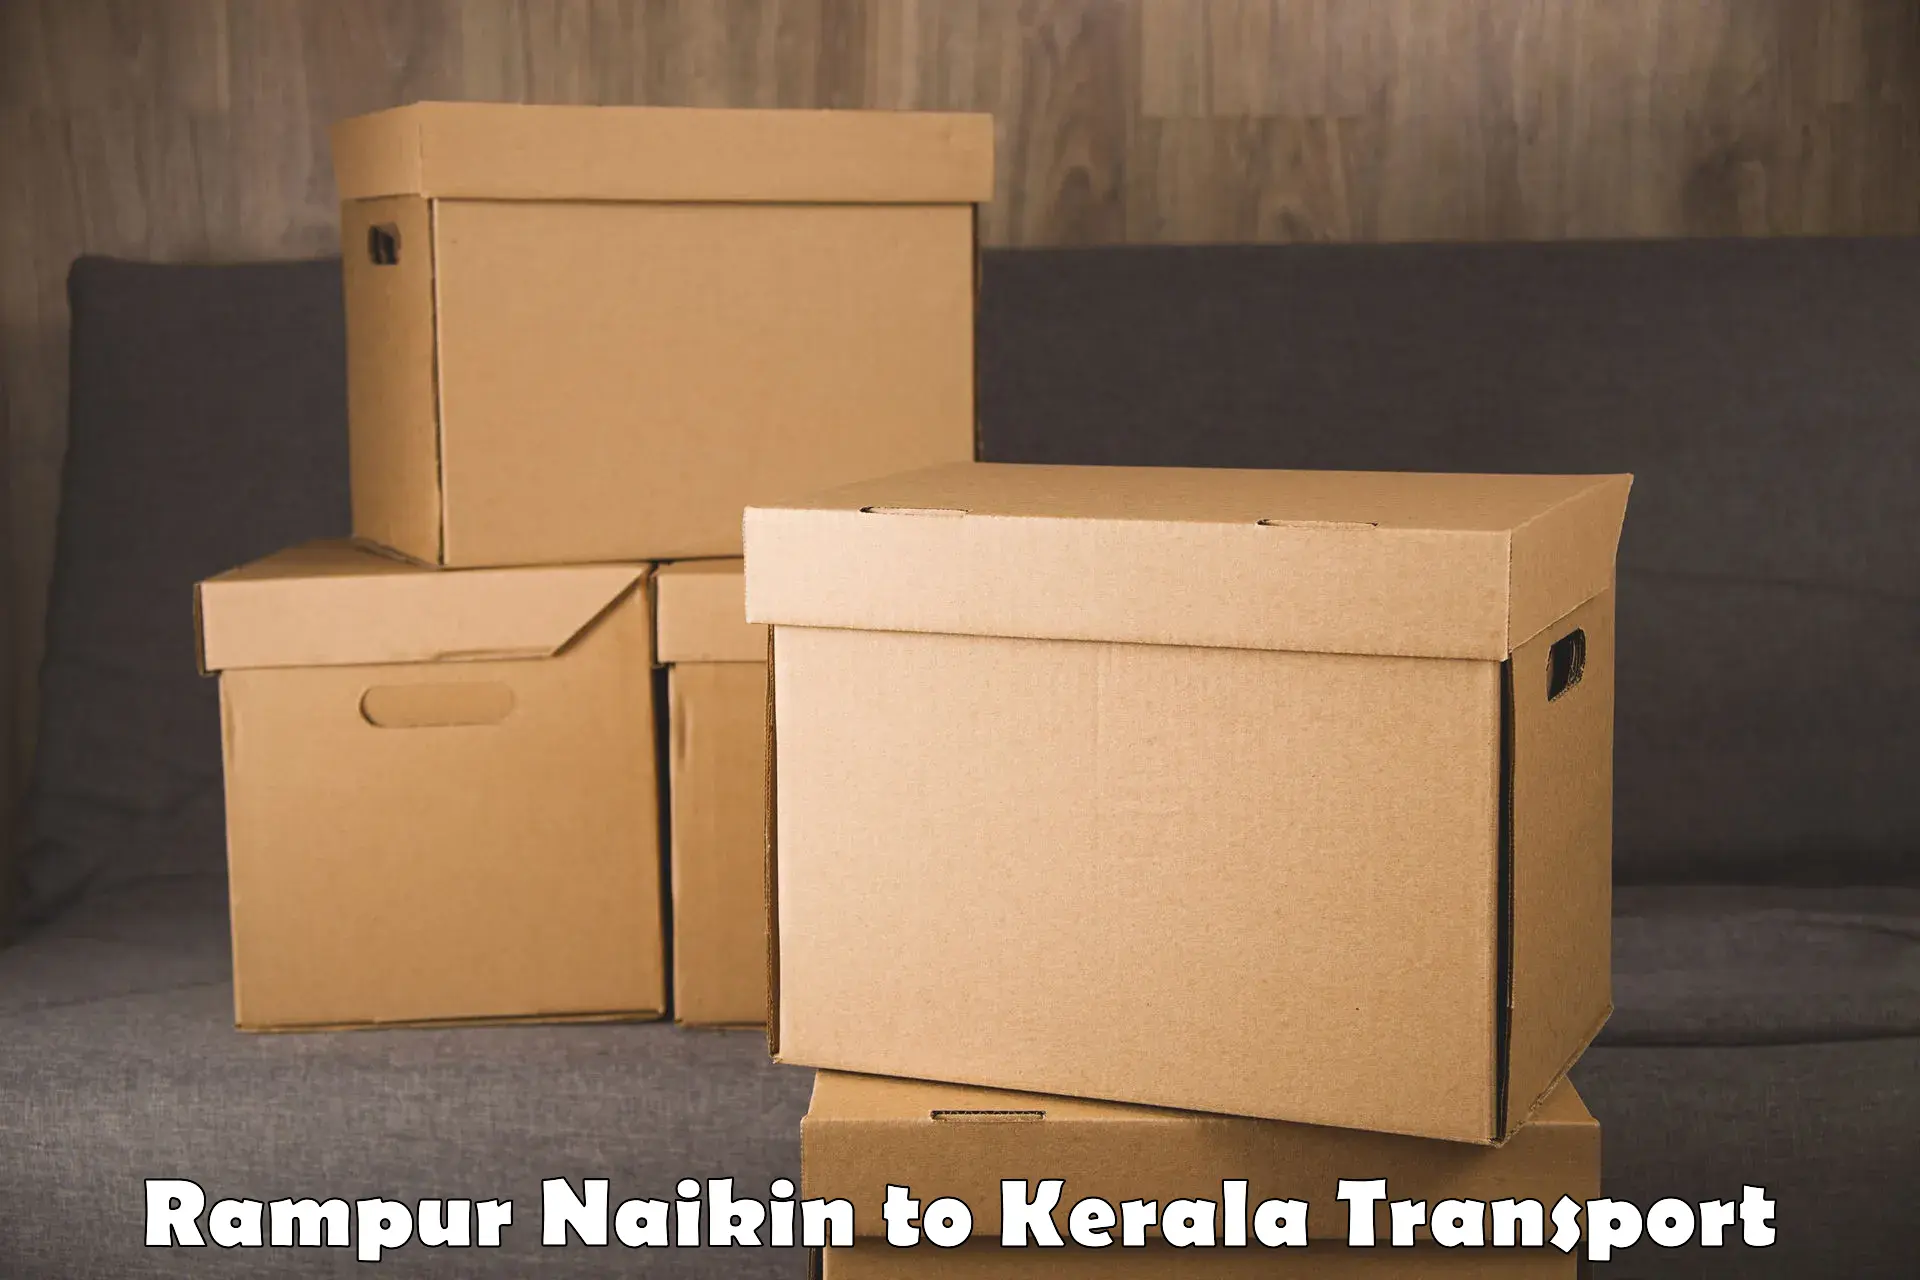 Goods delivery service Rampur Naikin to Kannur